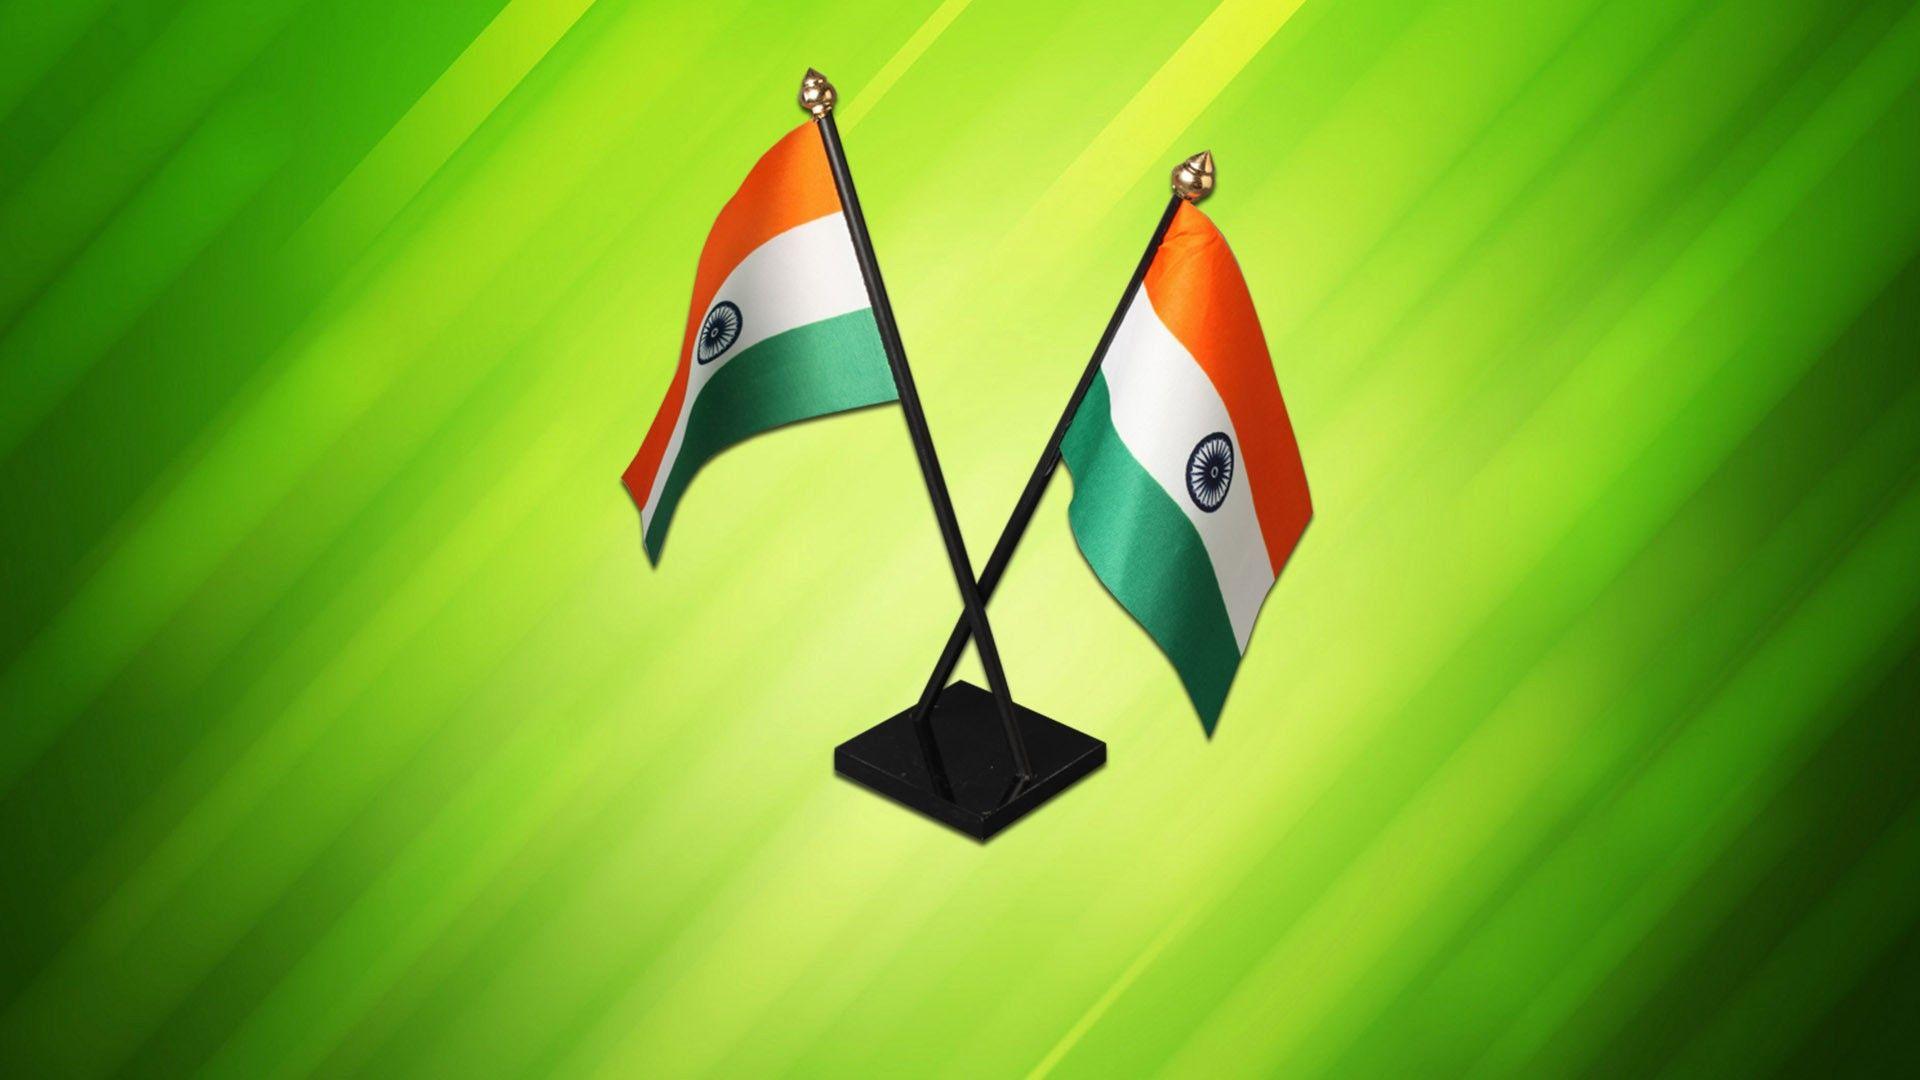 Indian Flag HD Wallpaper Free Indian Flag HD Background